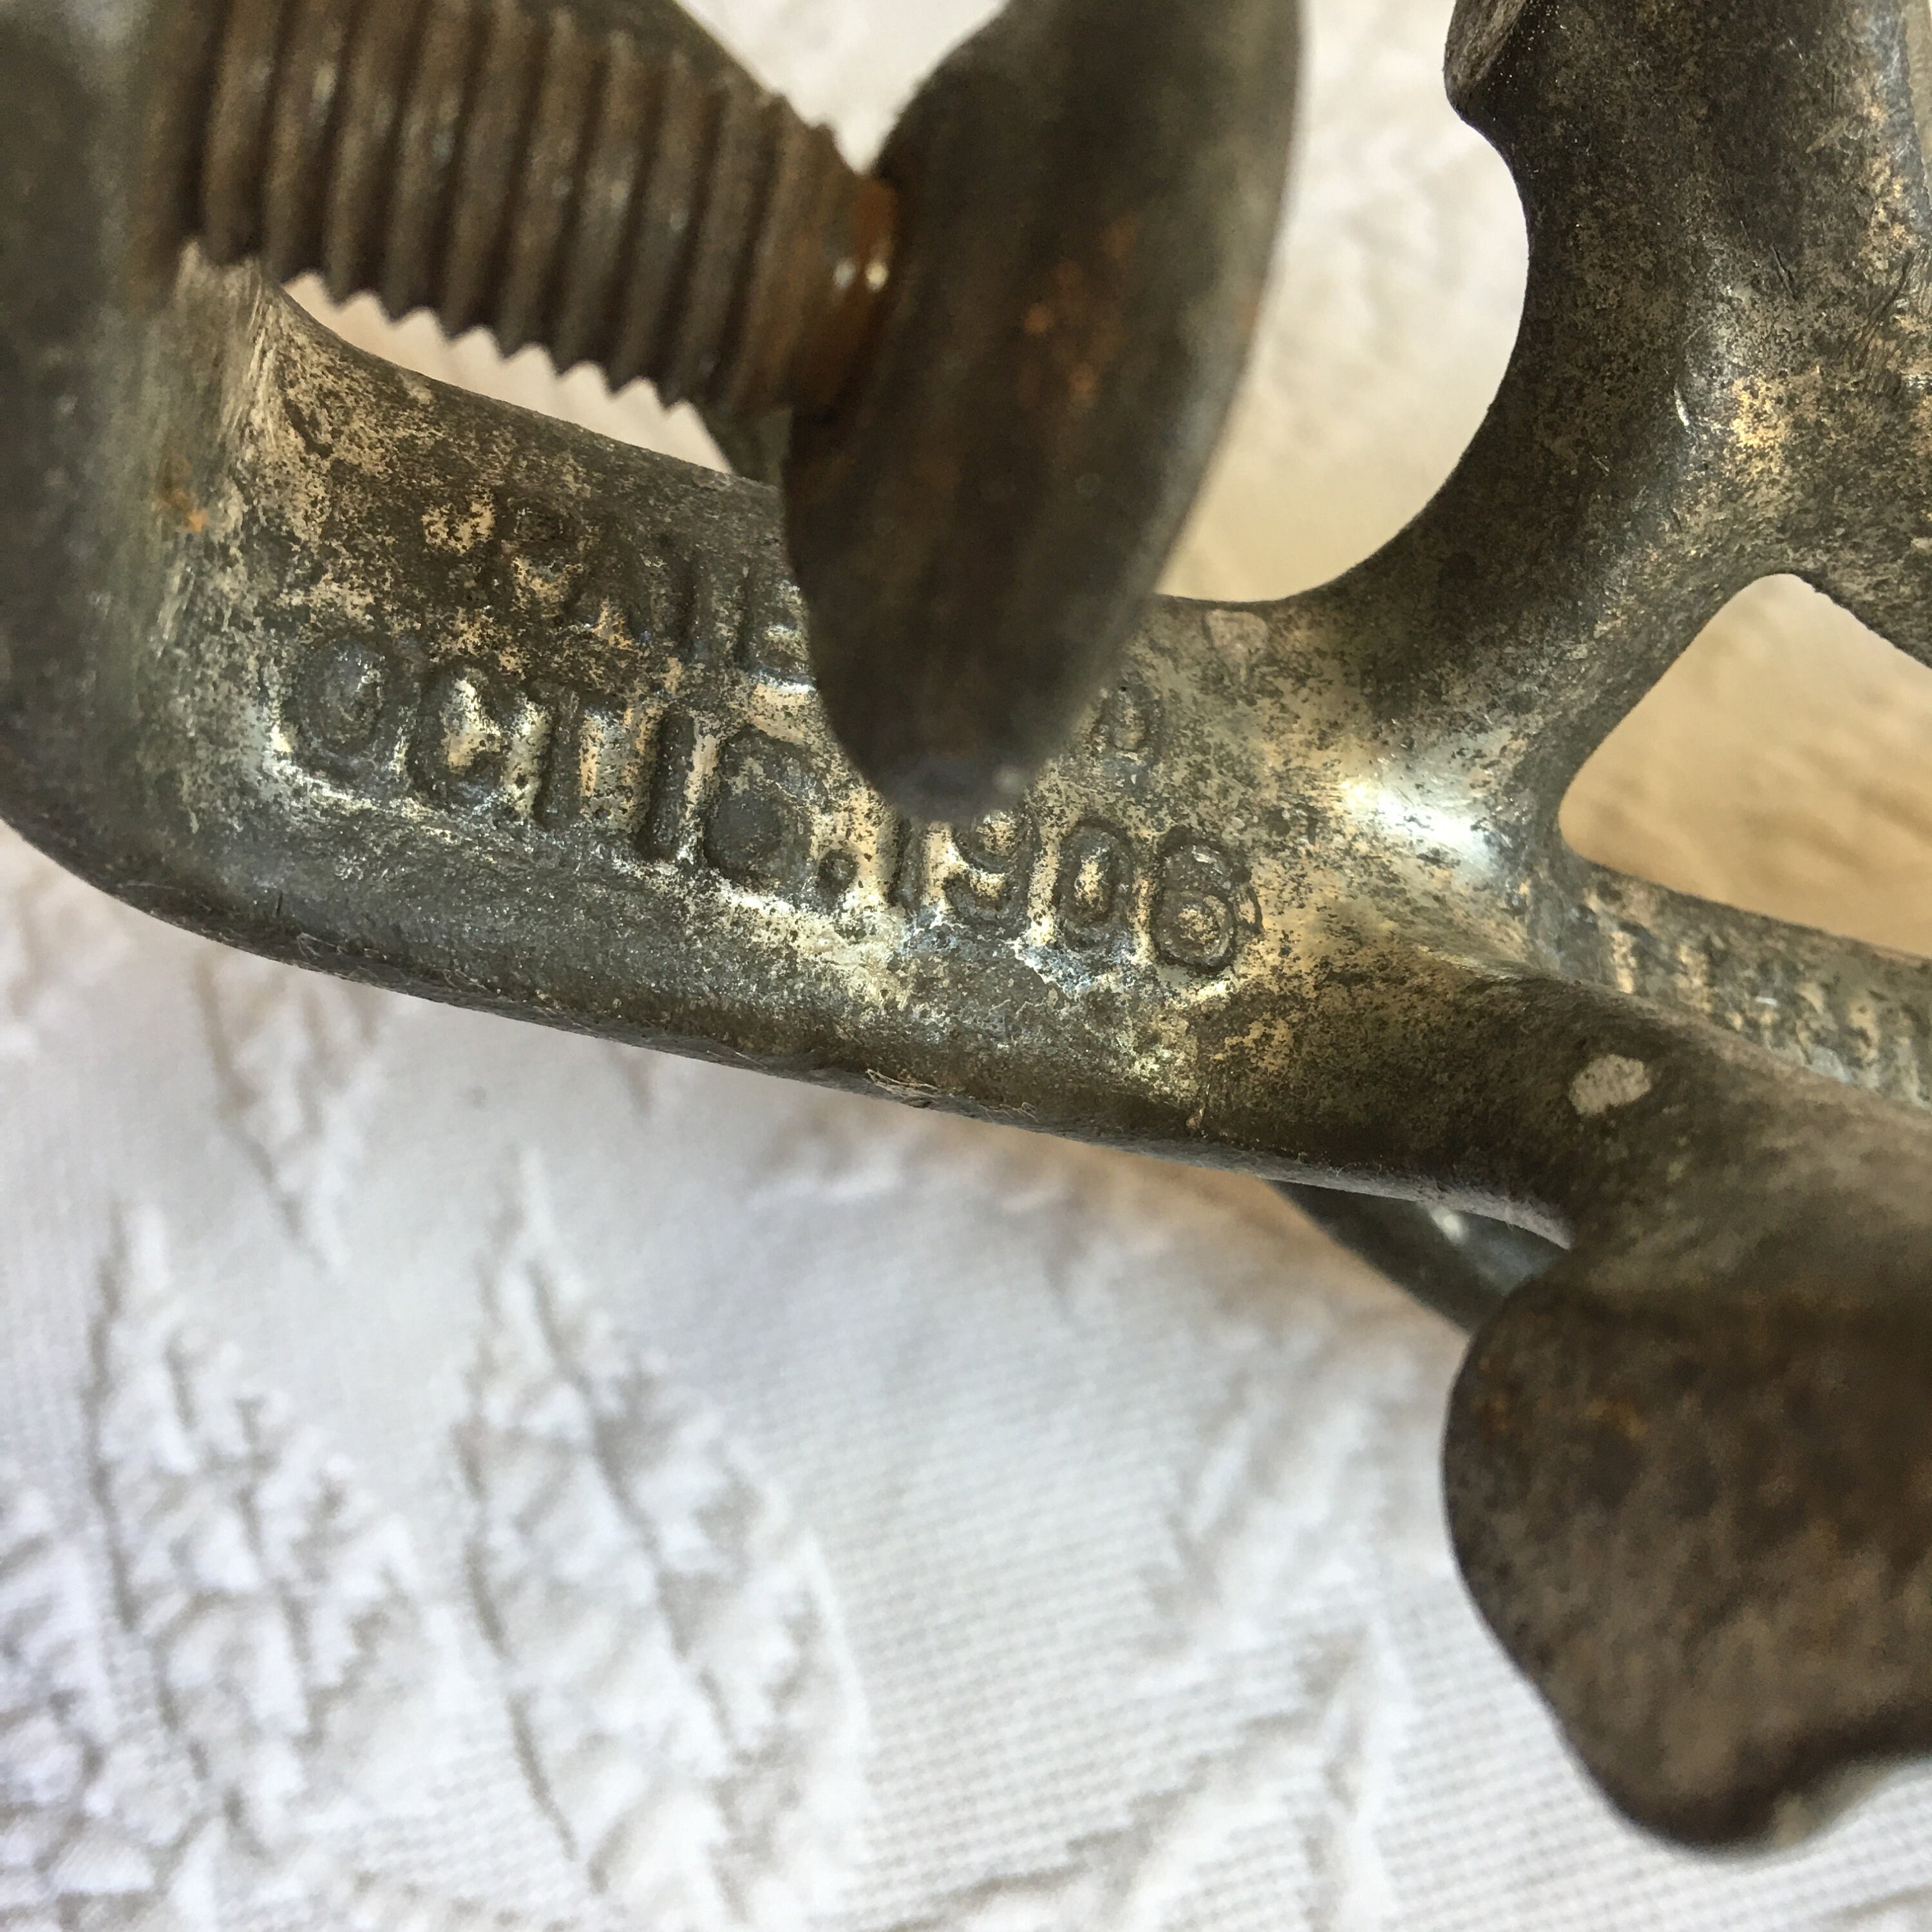 Table Mount Tinned Cast Iron Manual Meat Grinder #12 - Fante's Kitchen Shop  - Since 1906